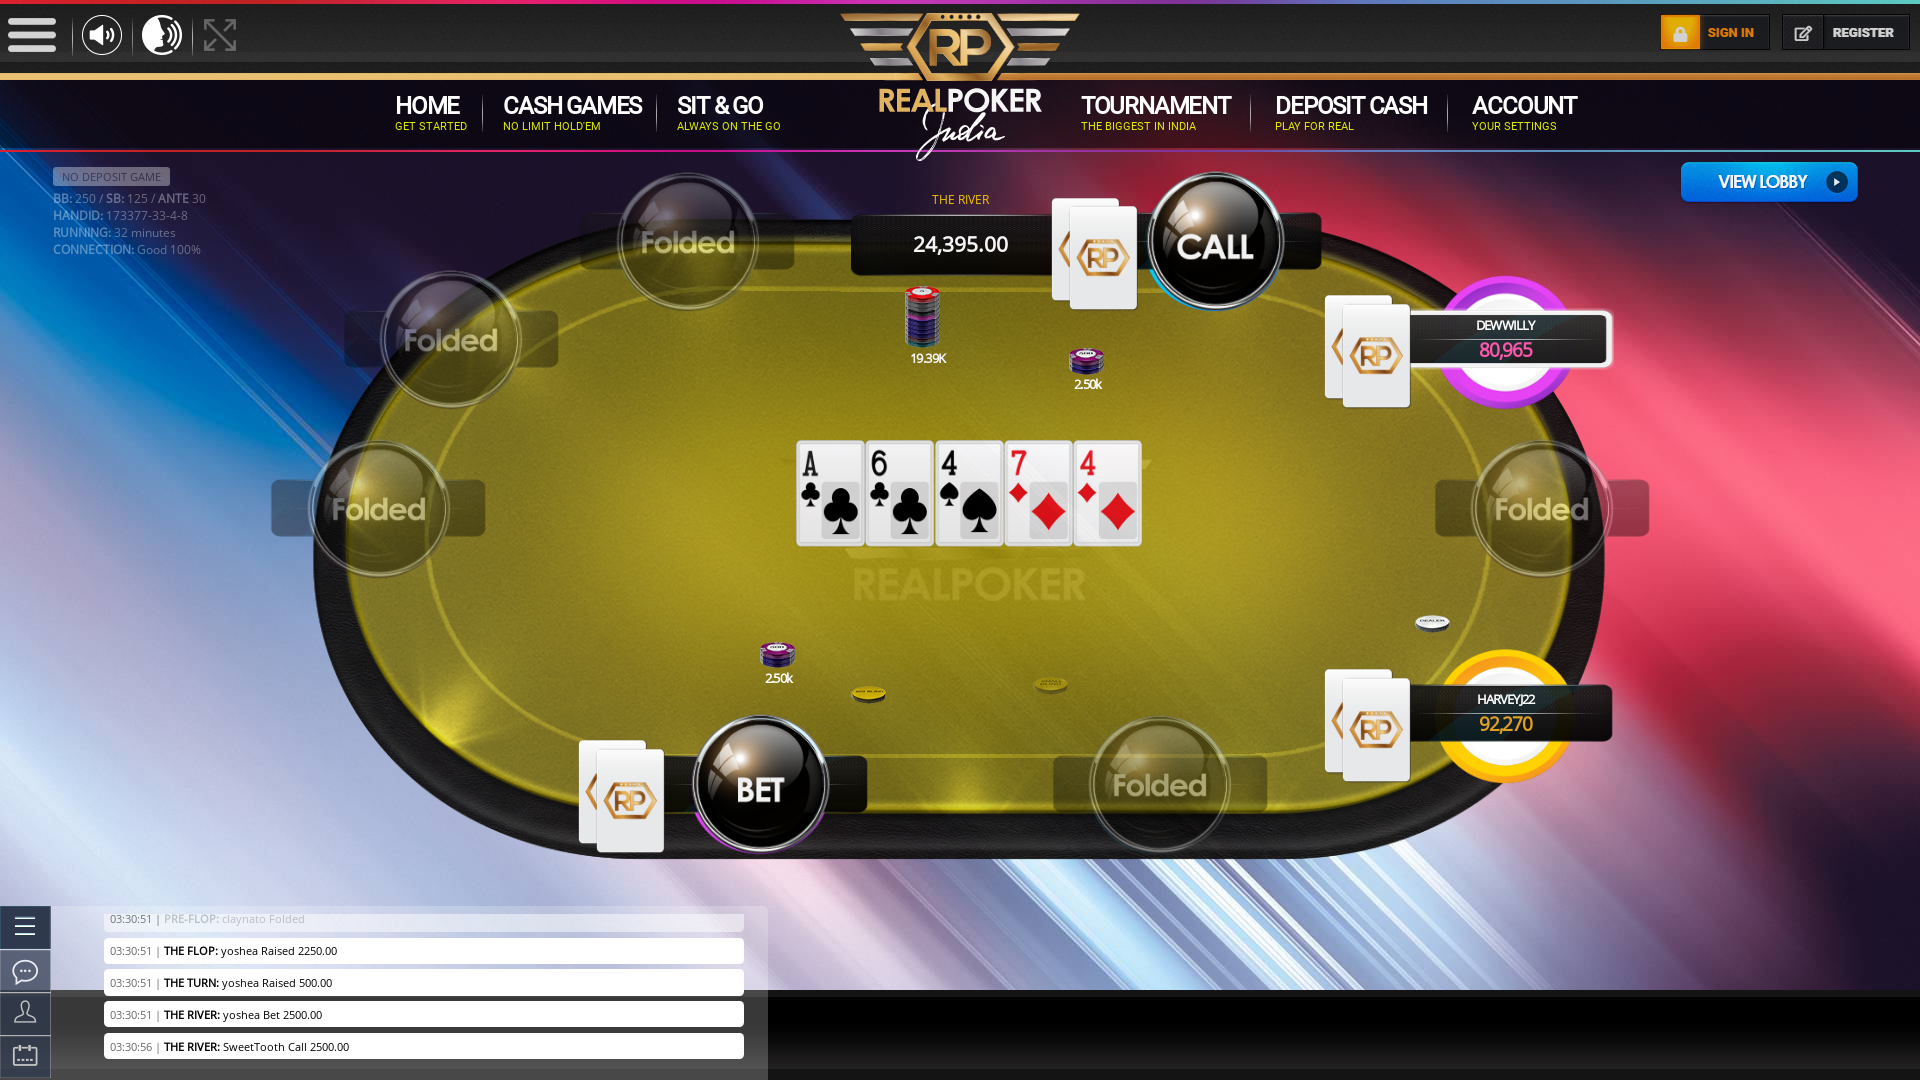 Online poker on a 10 player table in the 32nd minute match up